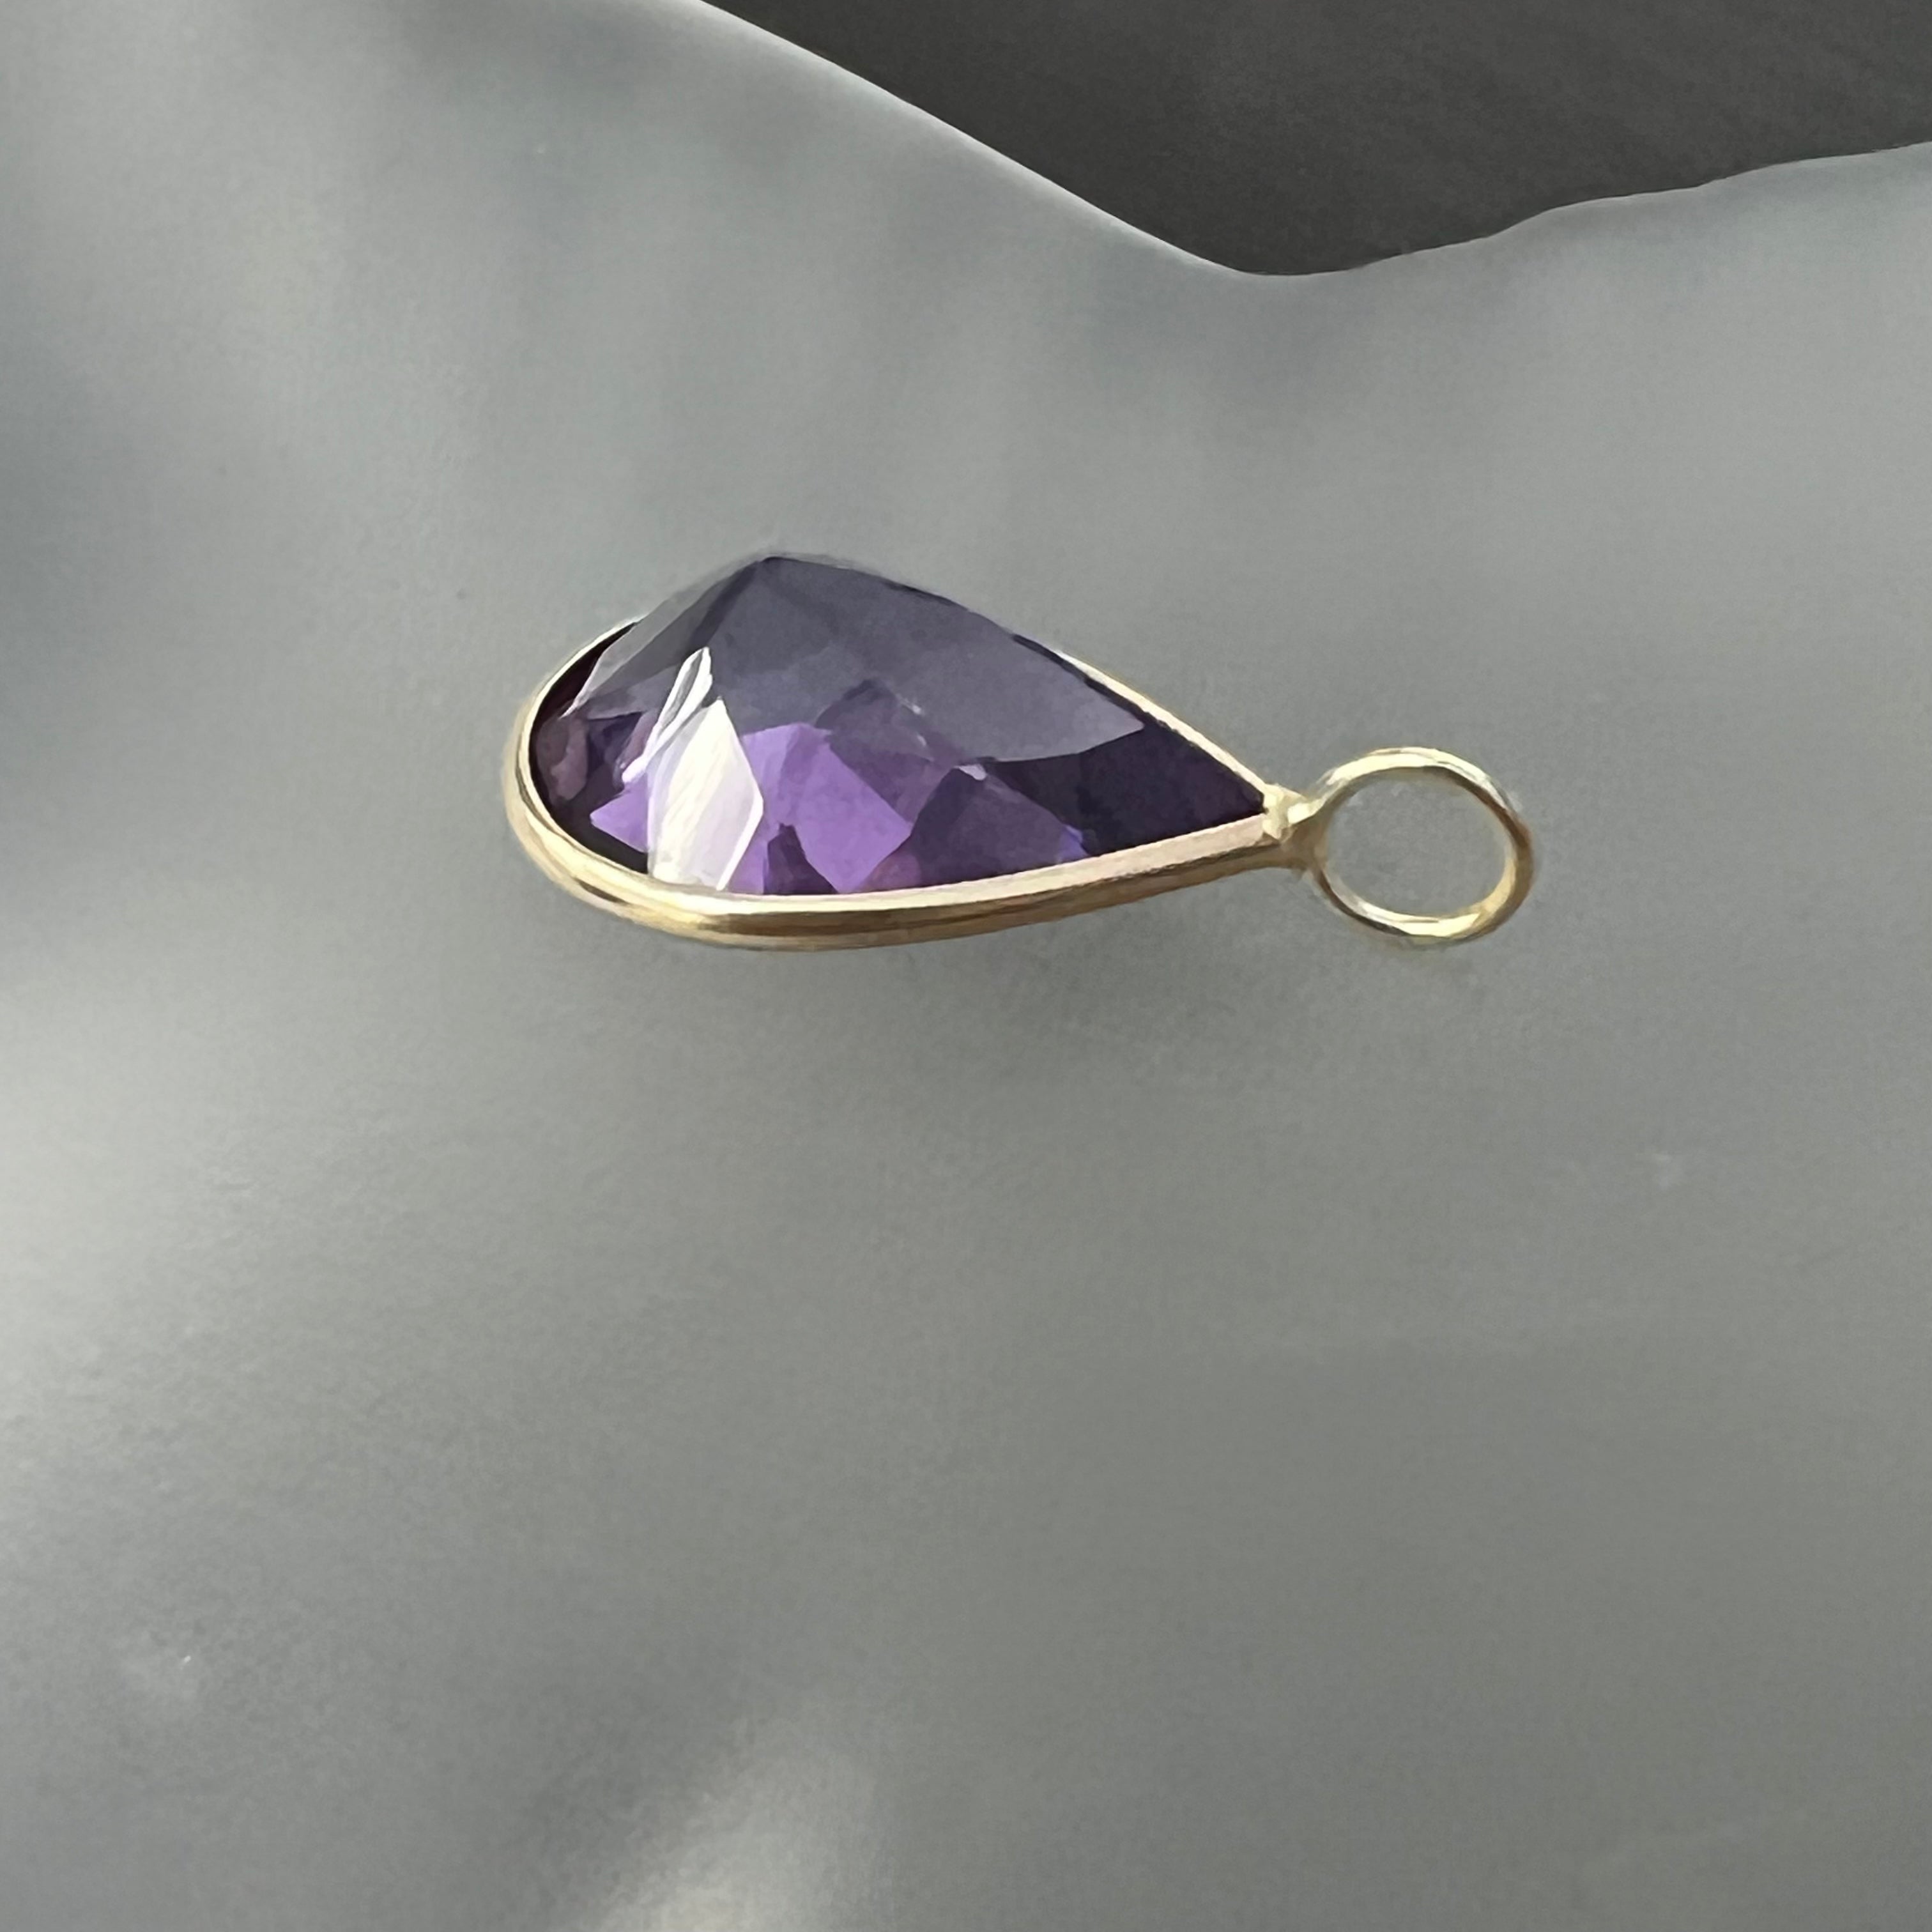 6.5CT Natural Pear Amethyst 14K Yellow Gold Pendant Charm